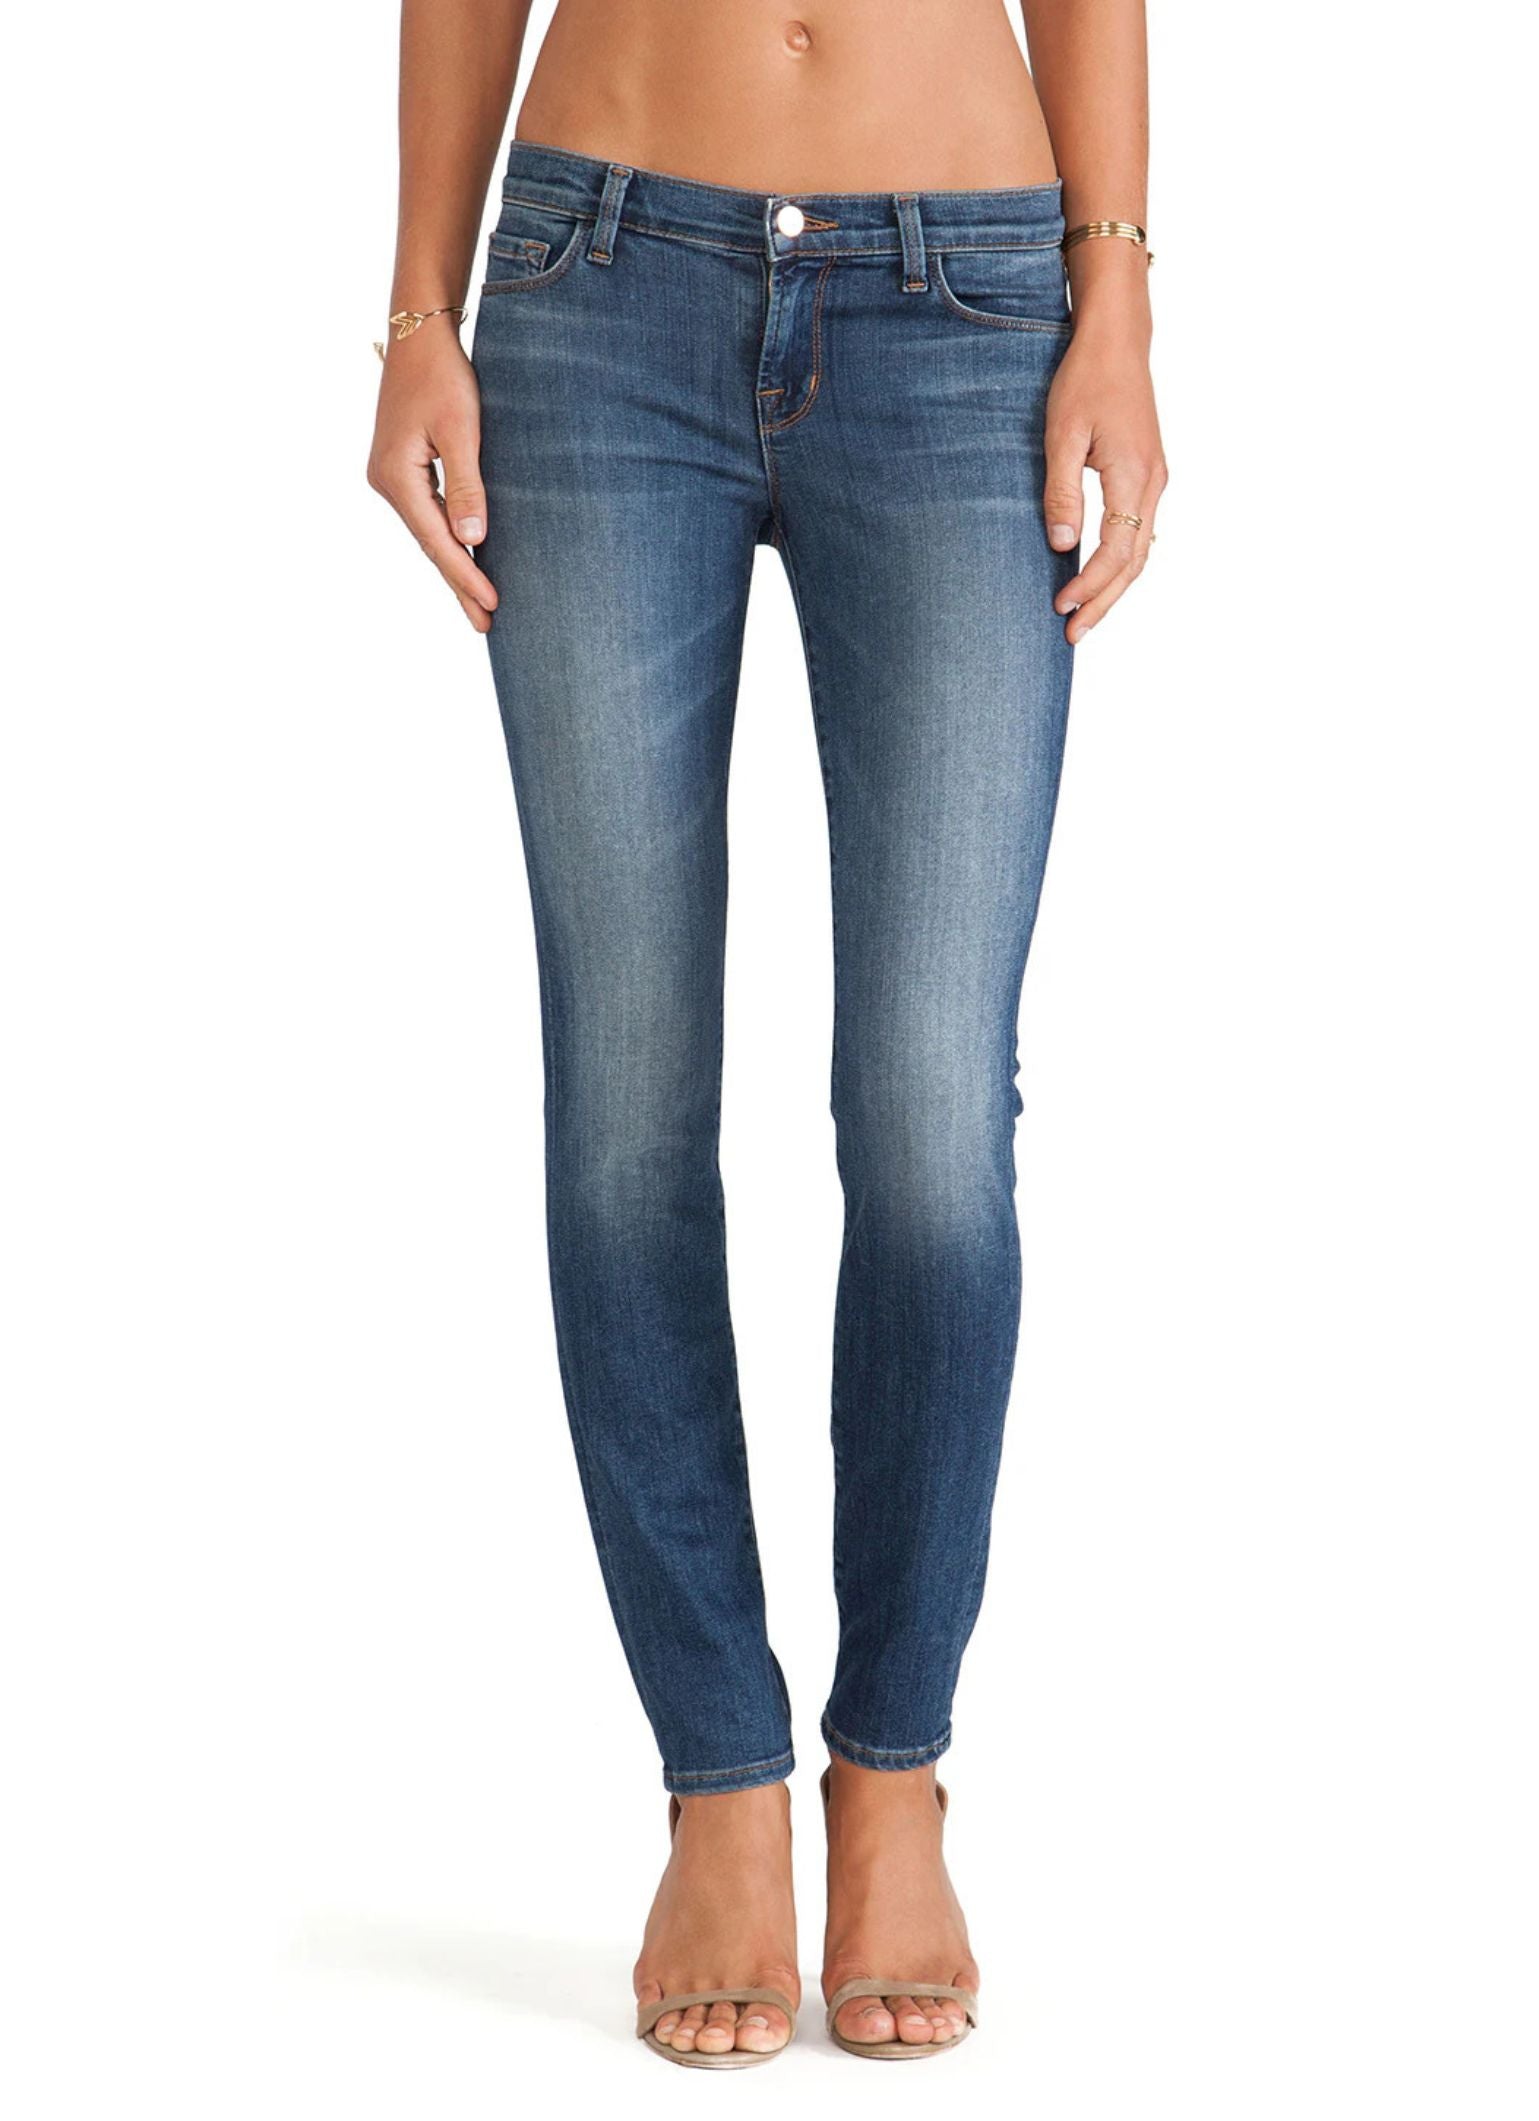 J Brand Lucent Mid Rise Jeans - Second Chance